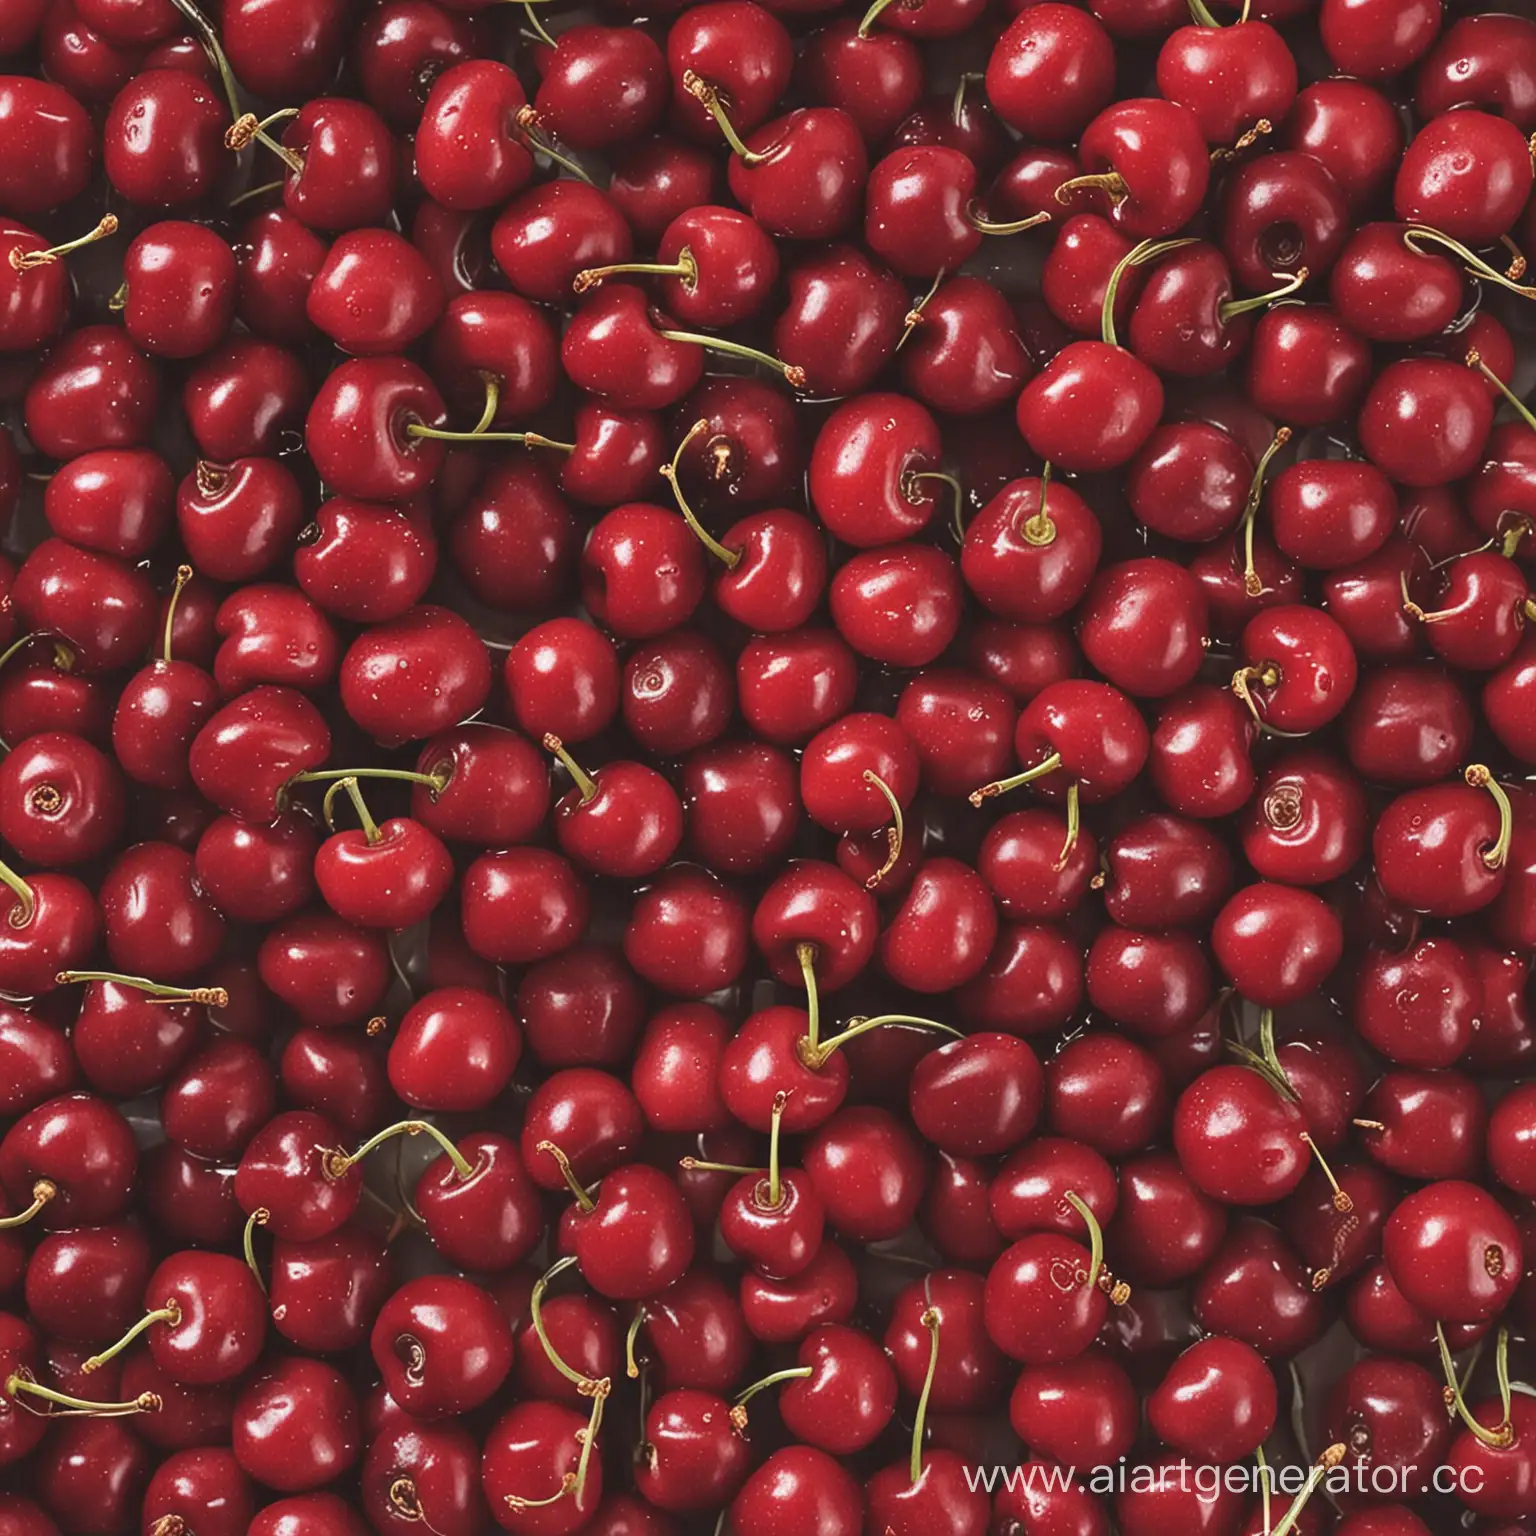 Bunch-of-Fresh-Red-Cherries-on-Rustic-Wooden-Surface